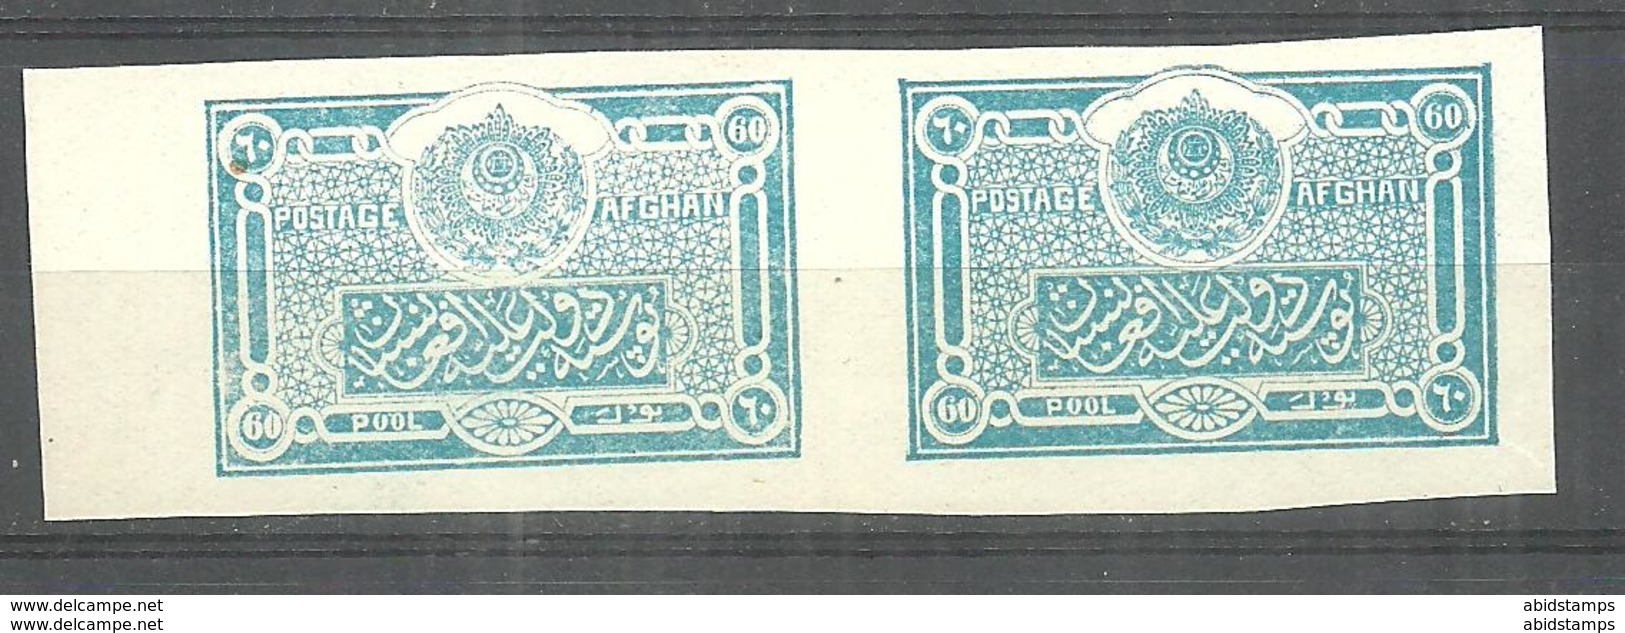 AFGHANISTAN STAMPS IMPERF PAIR MNH - Afghanistan